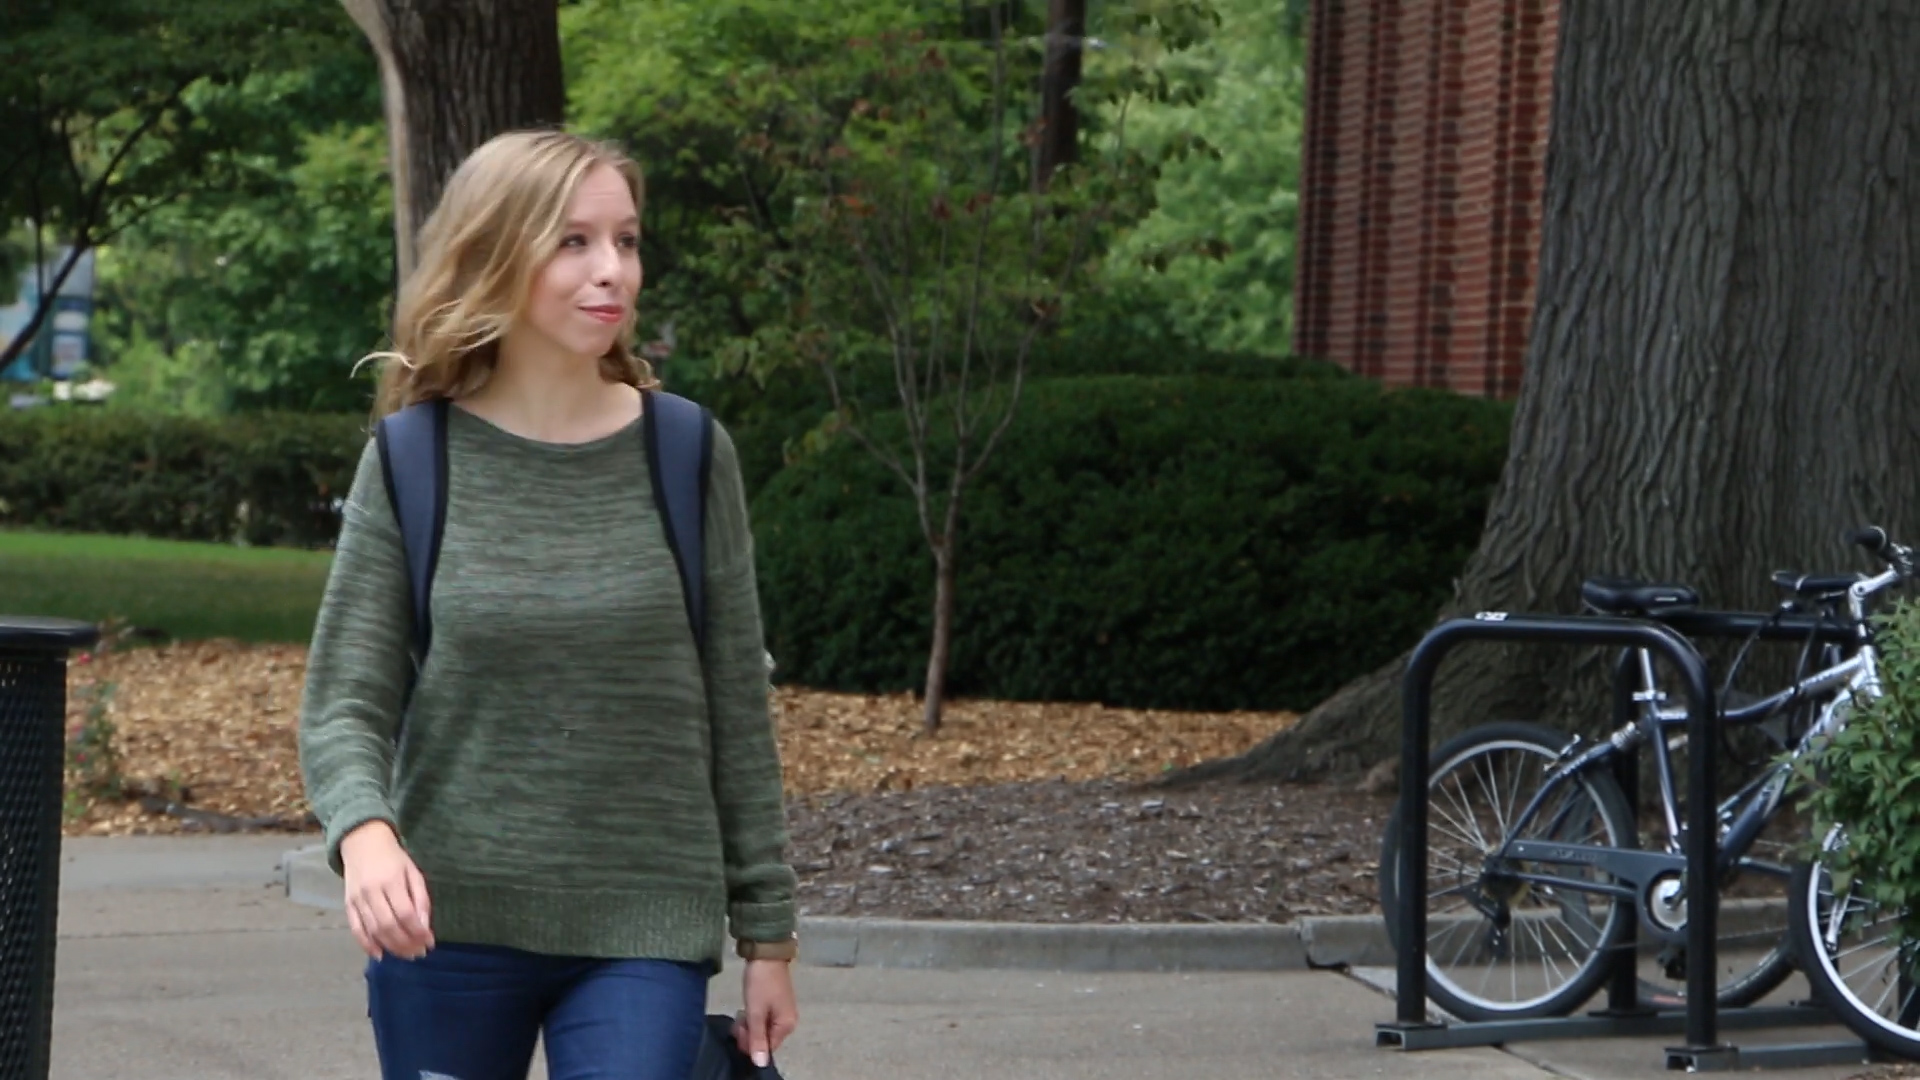 Lacey Parham is taking advantage of UofL's 3+3 program, which allows her to finish her last year of undergrad and her first year of law school simultaneously.